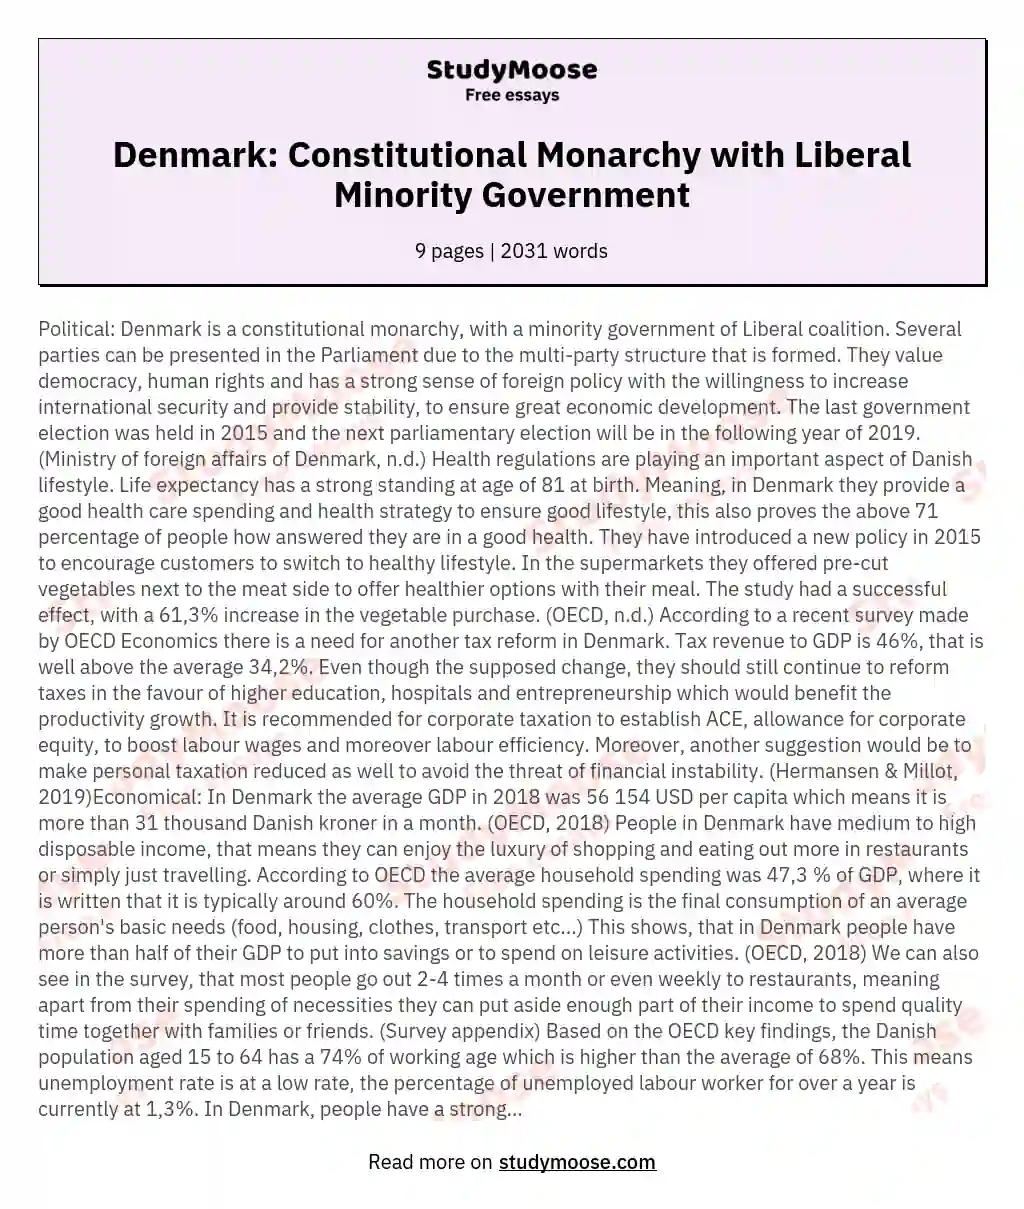 Political Denmark is a constitutional monarchy with a minority government of Liberal